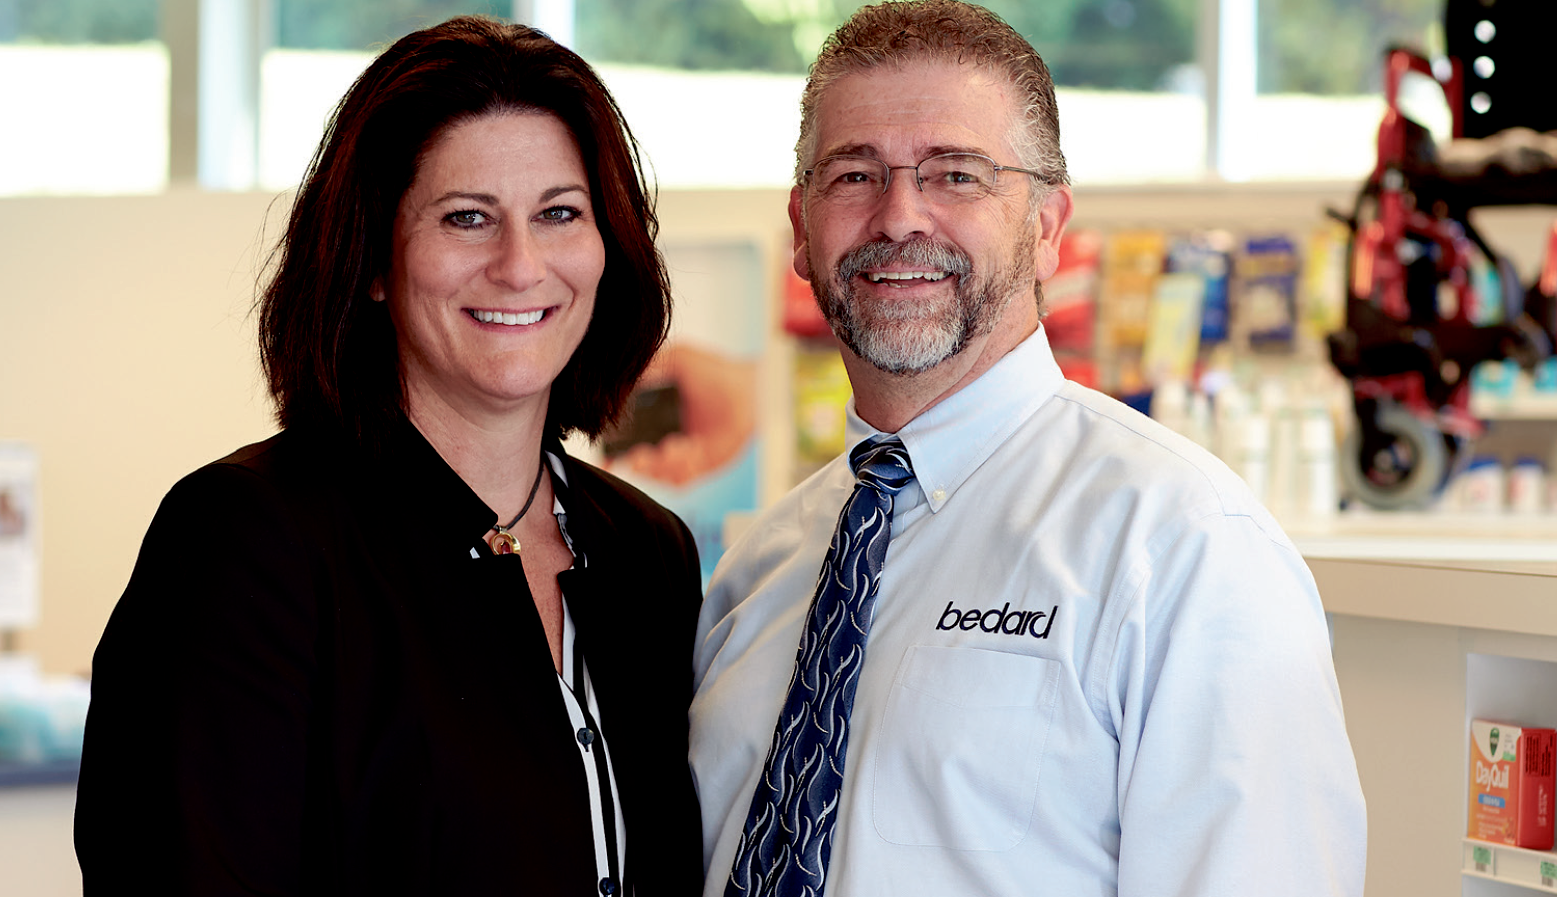 Annette and Michael Nadeau, owners of Bedard Pharmacy